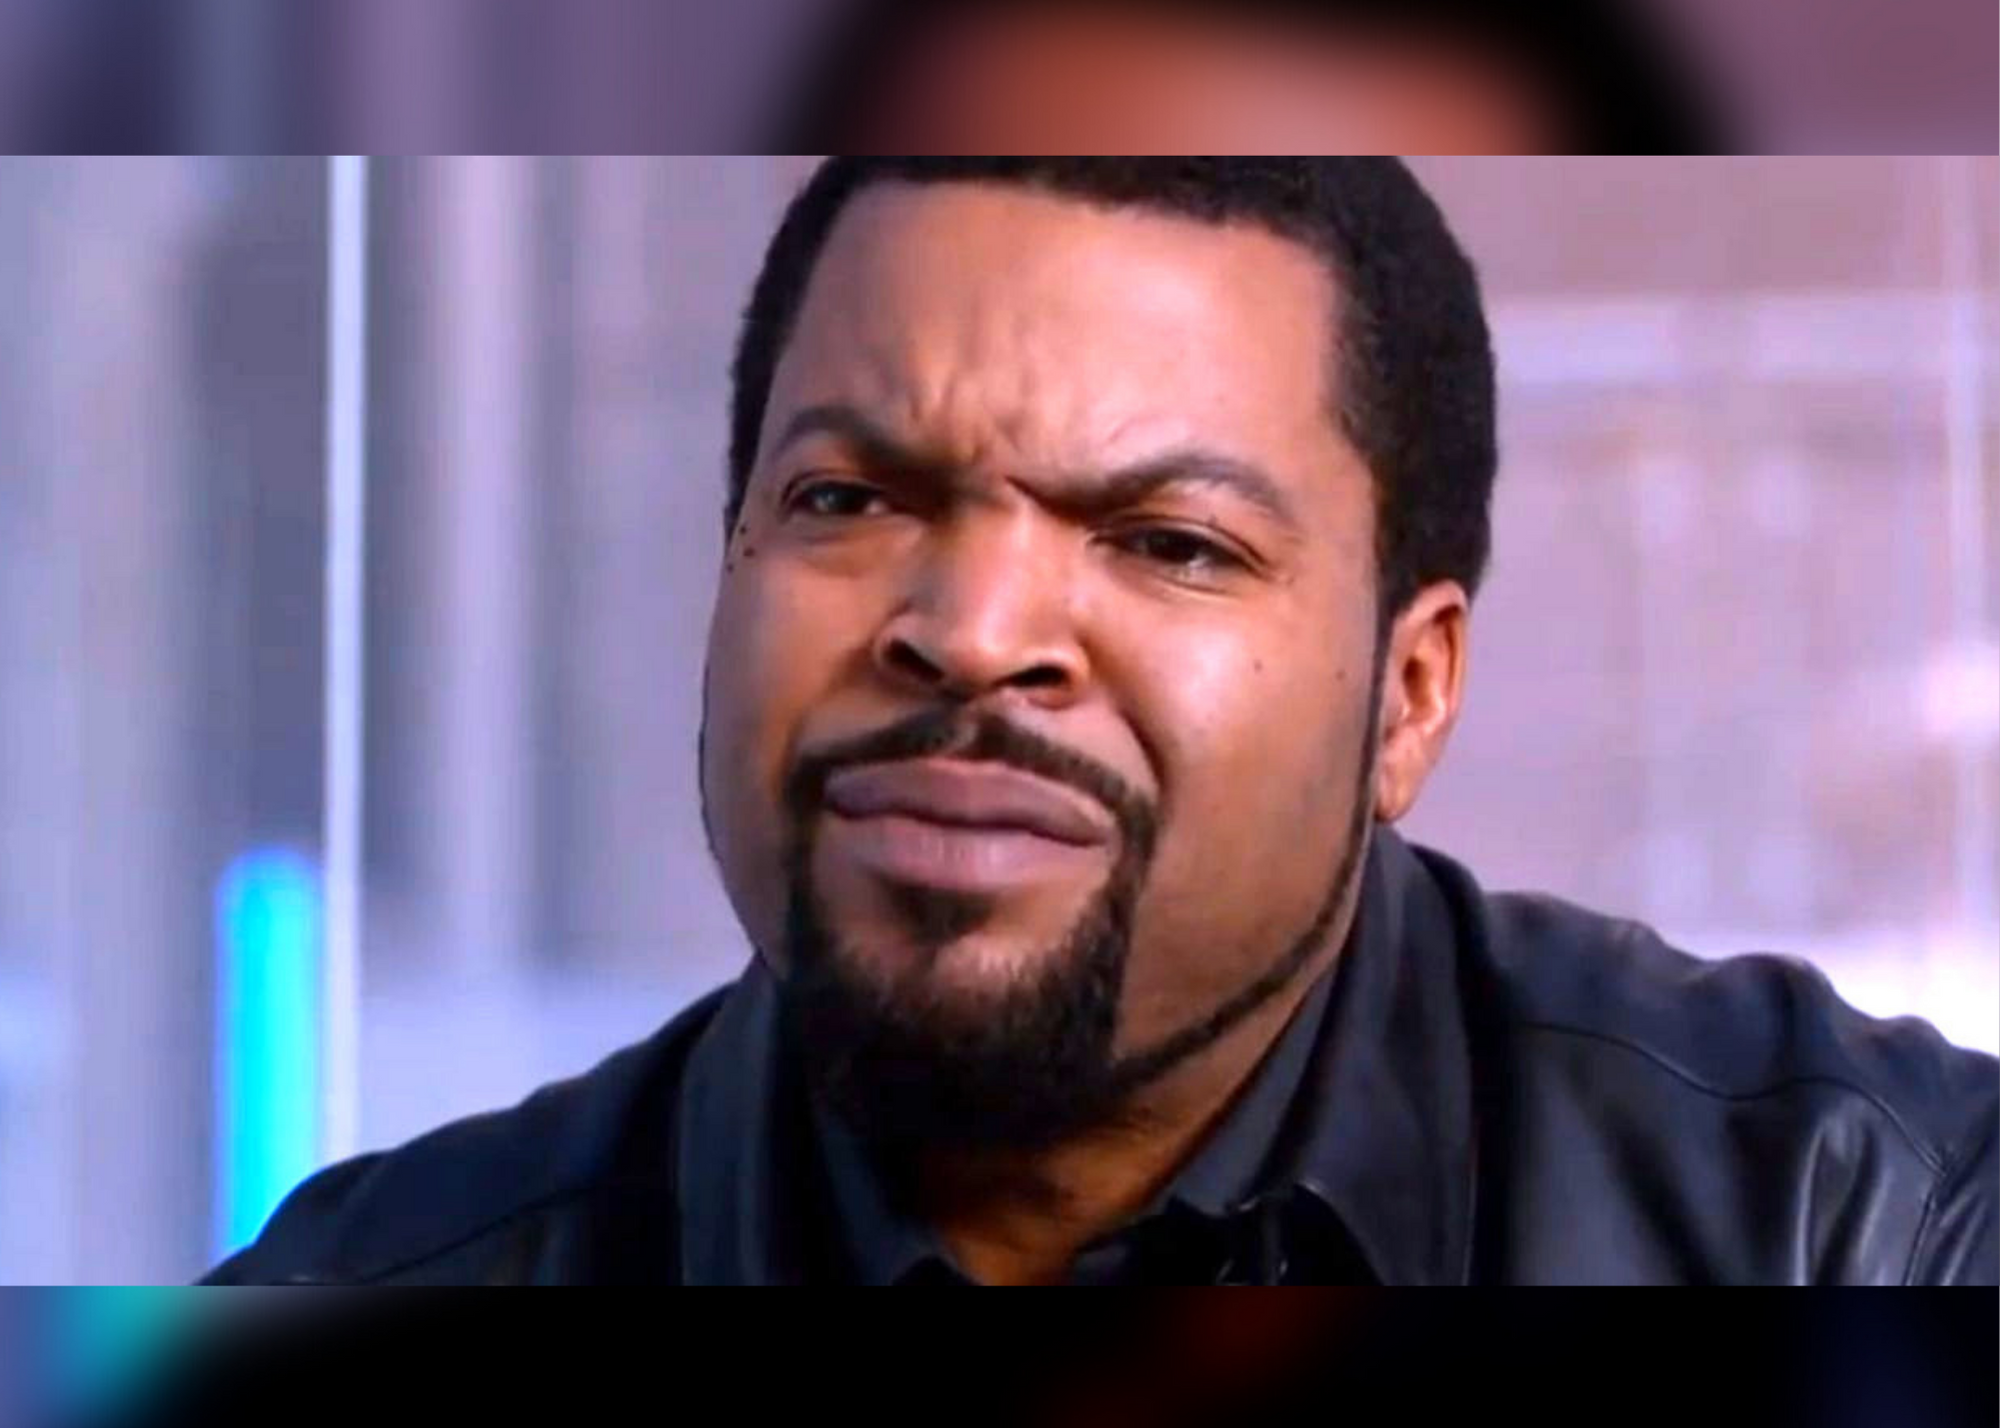 Ice Cube Turns Down $9 Million Movie Role After Declining COVID-19 Vaccine